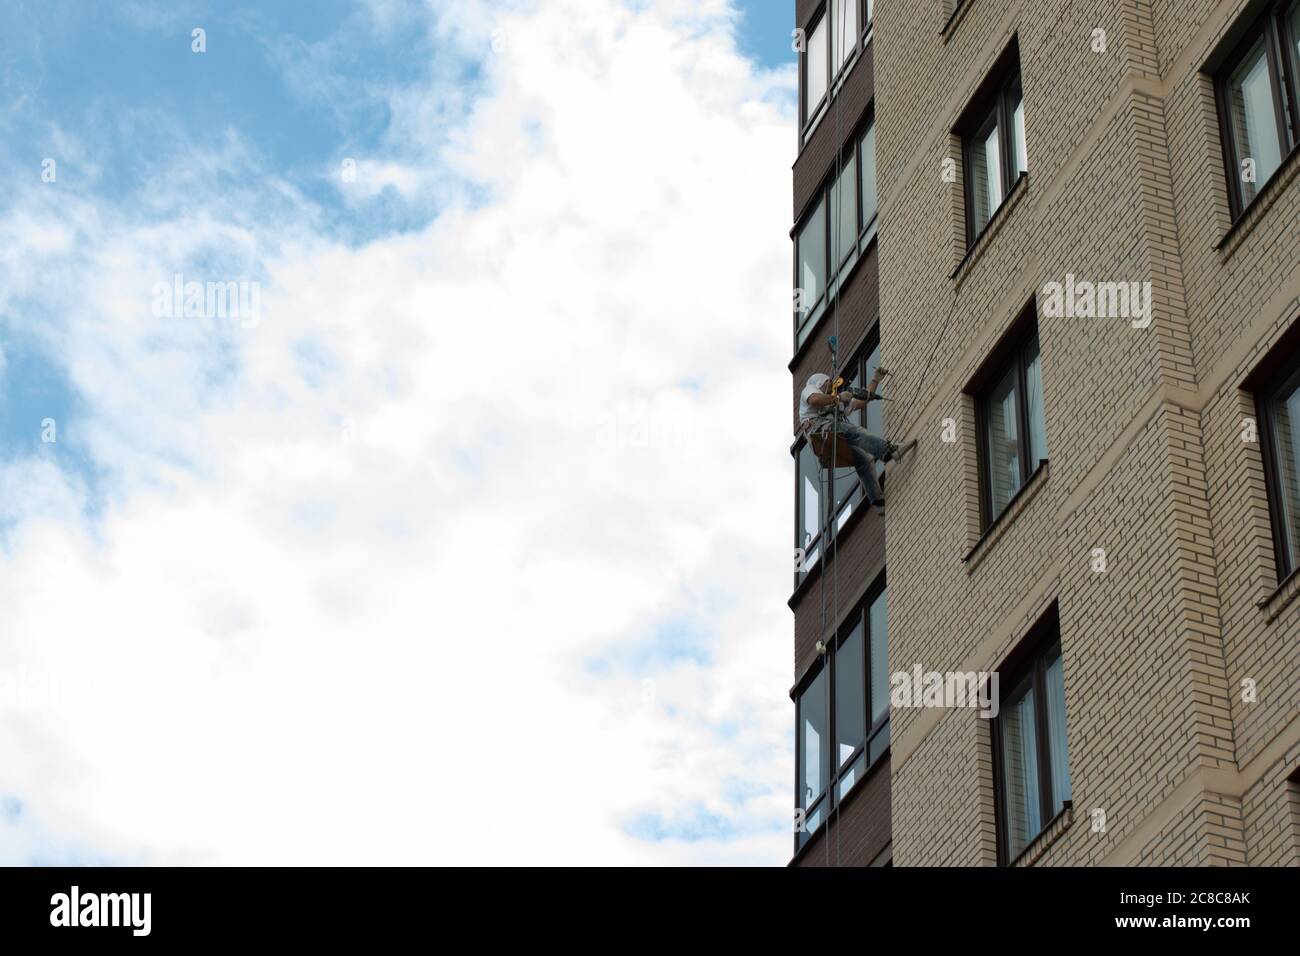 A worker hangs on a rope on a building. Work at height. Home washing and redecoration. Copy space Stock Photo